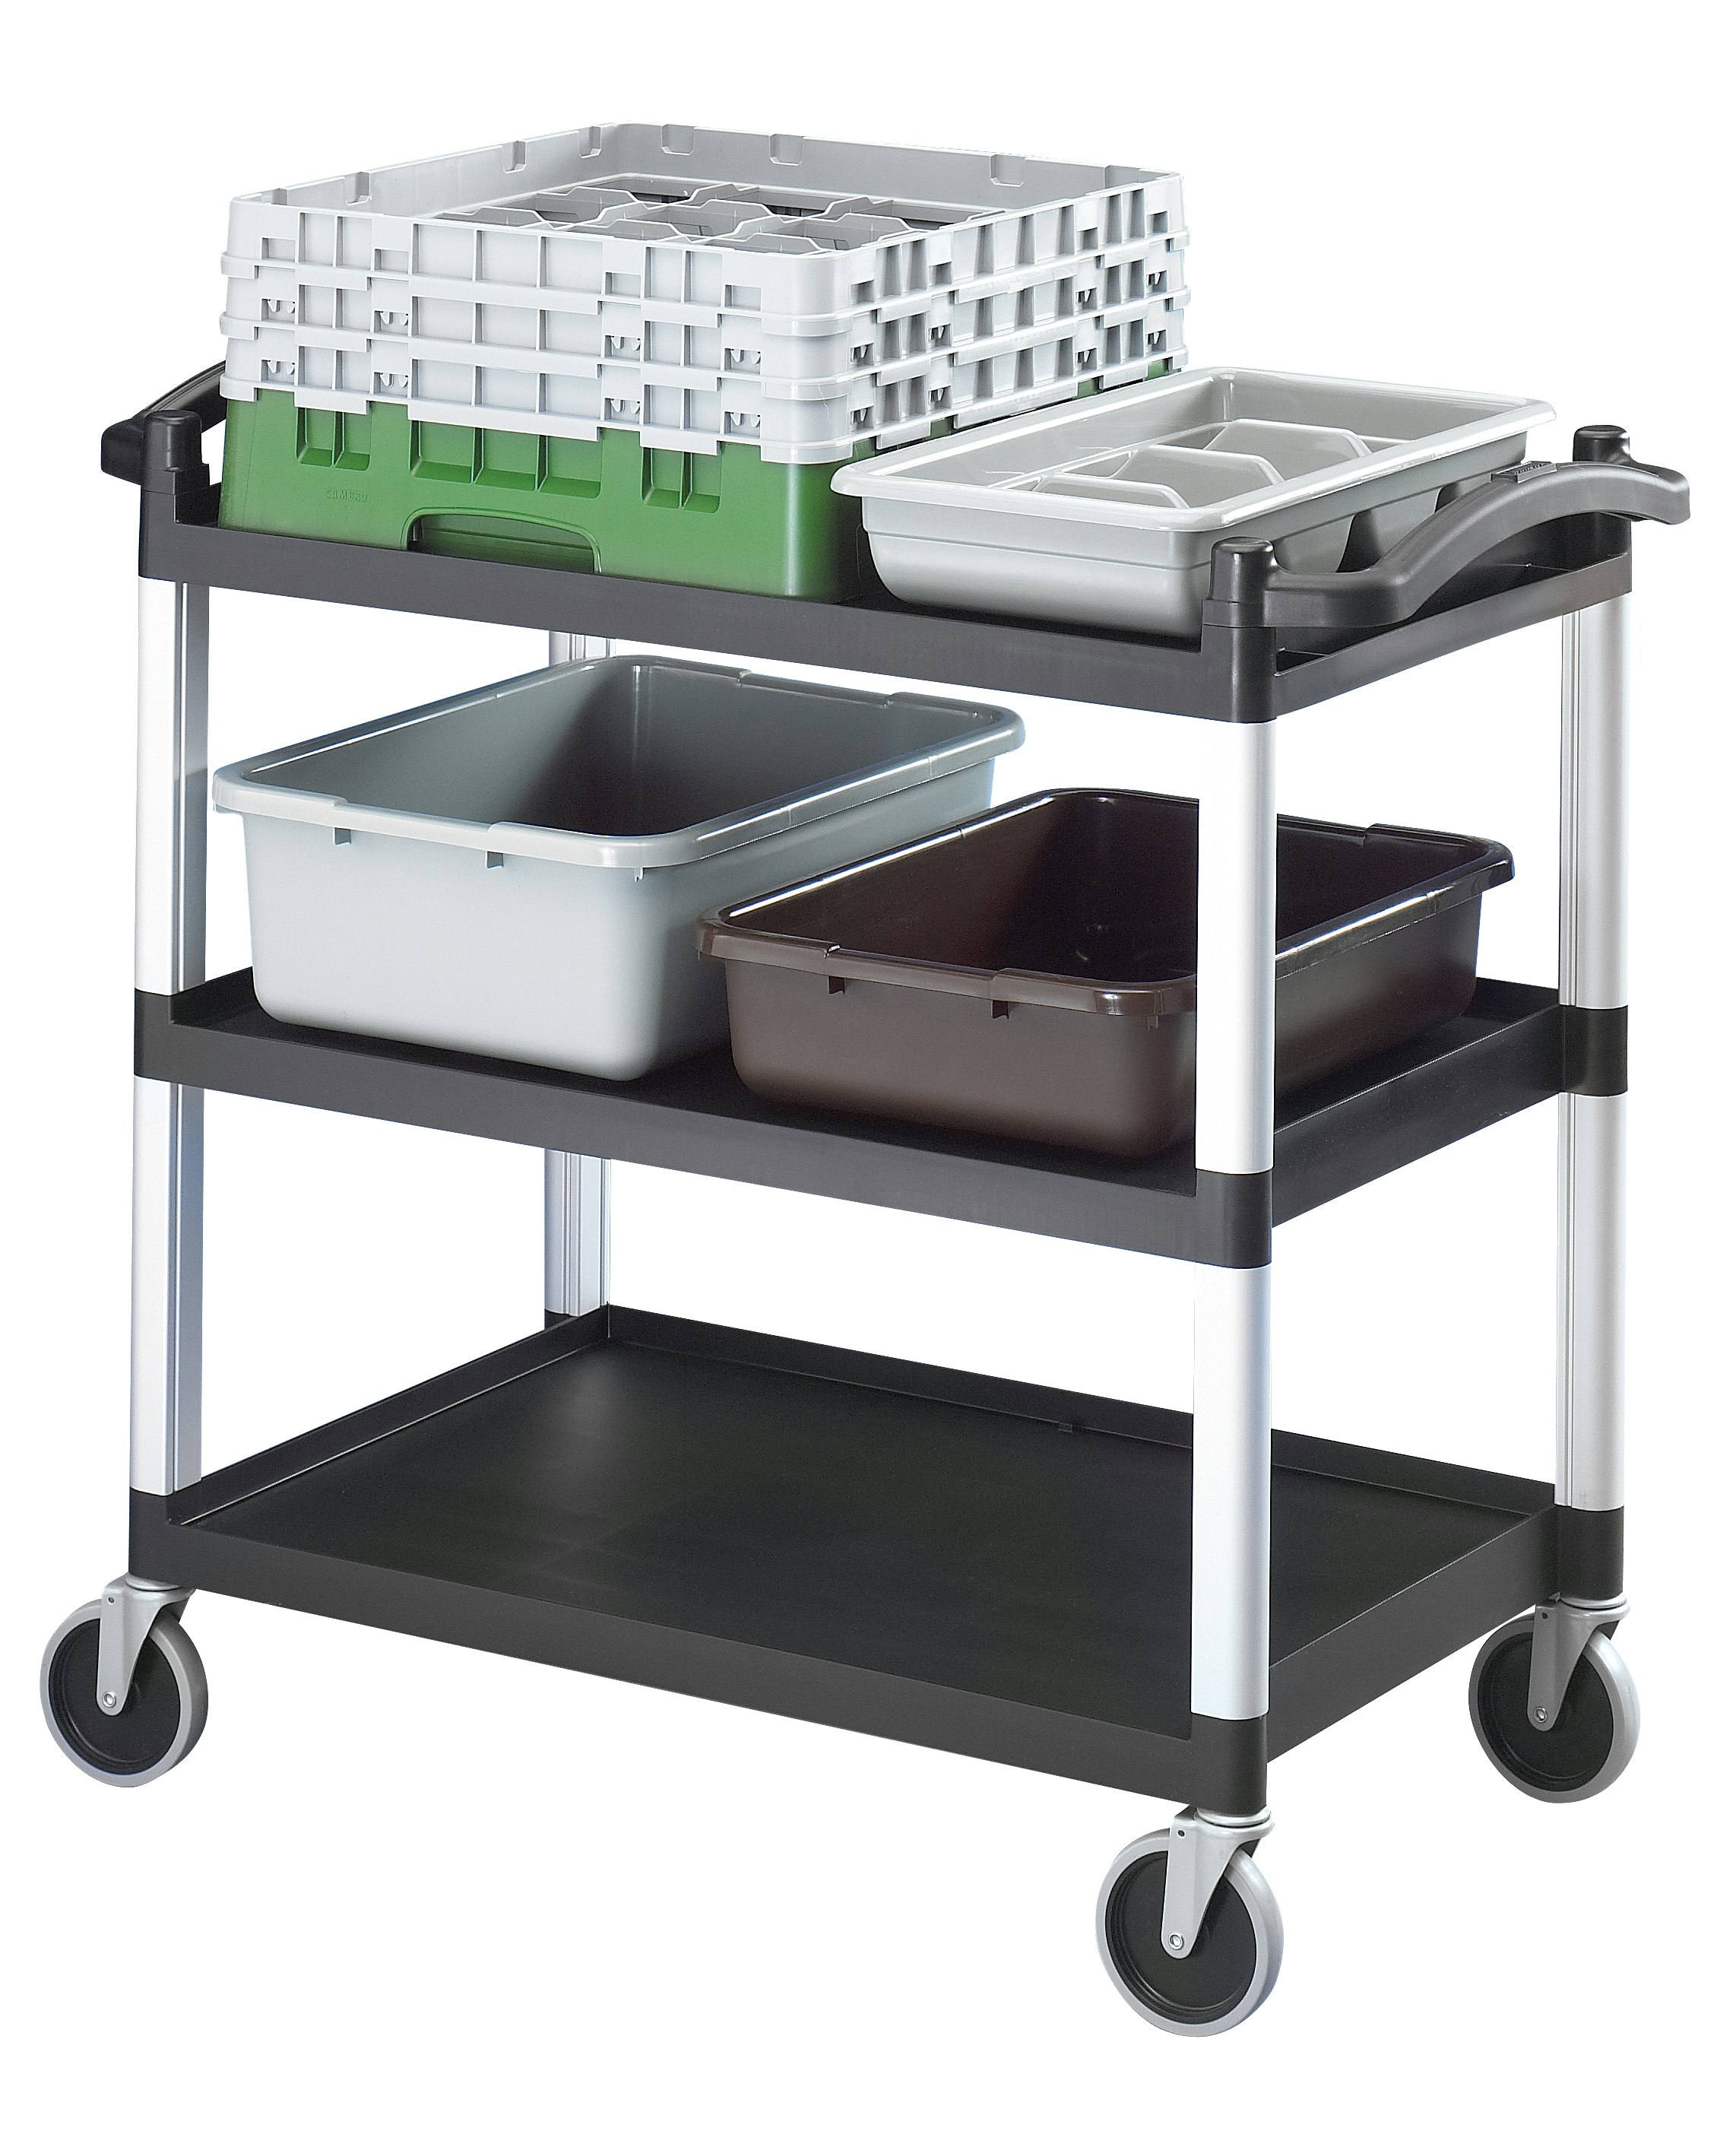 Load Capacity 120 kg Table Cart with 2 shelf levels Chunky Bunk Trolley 